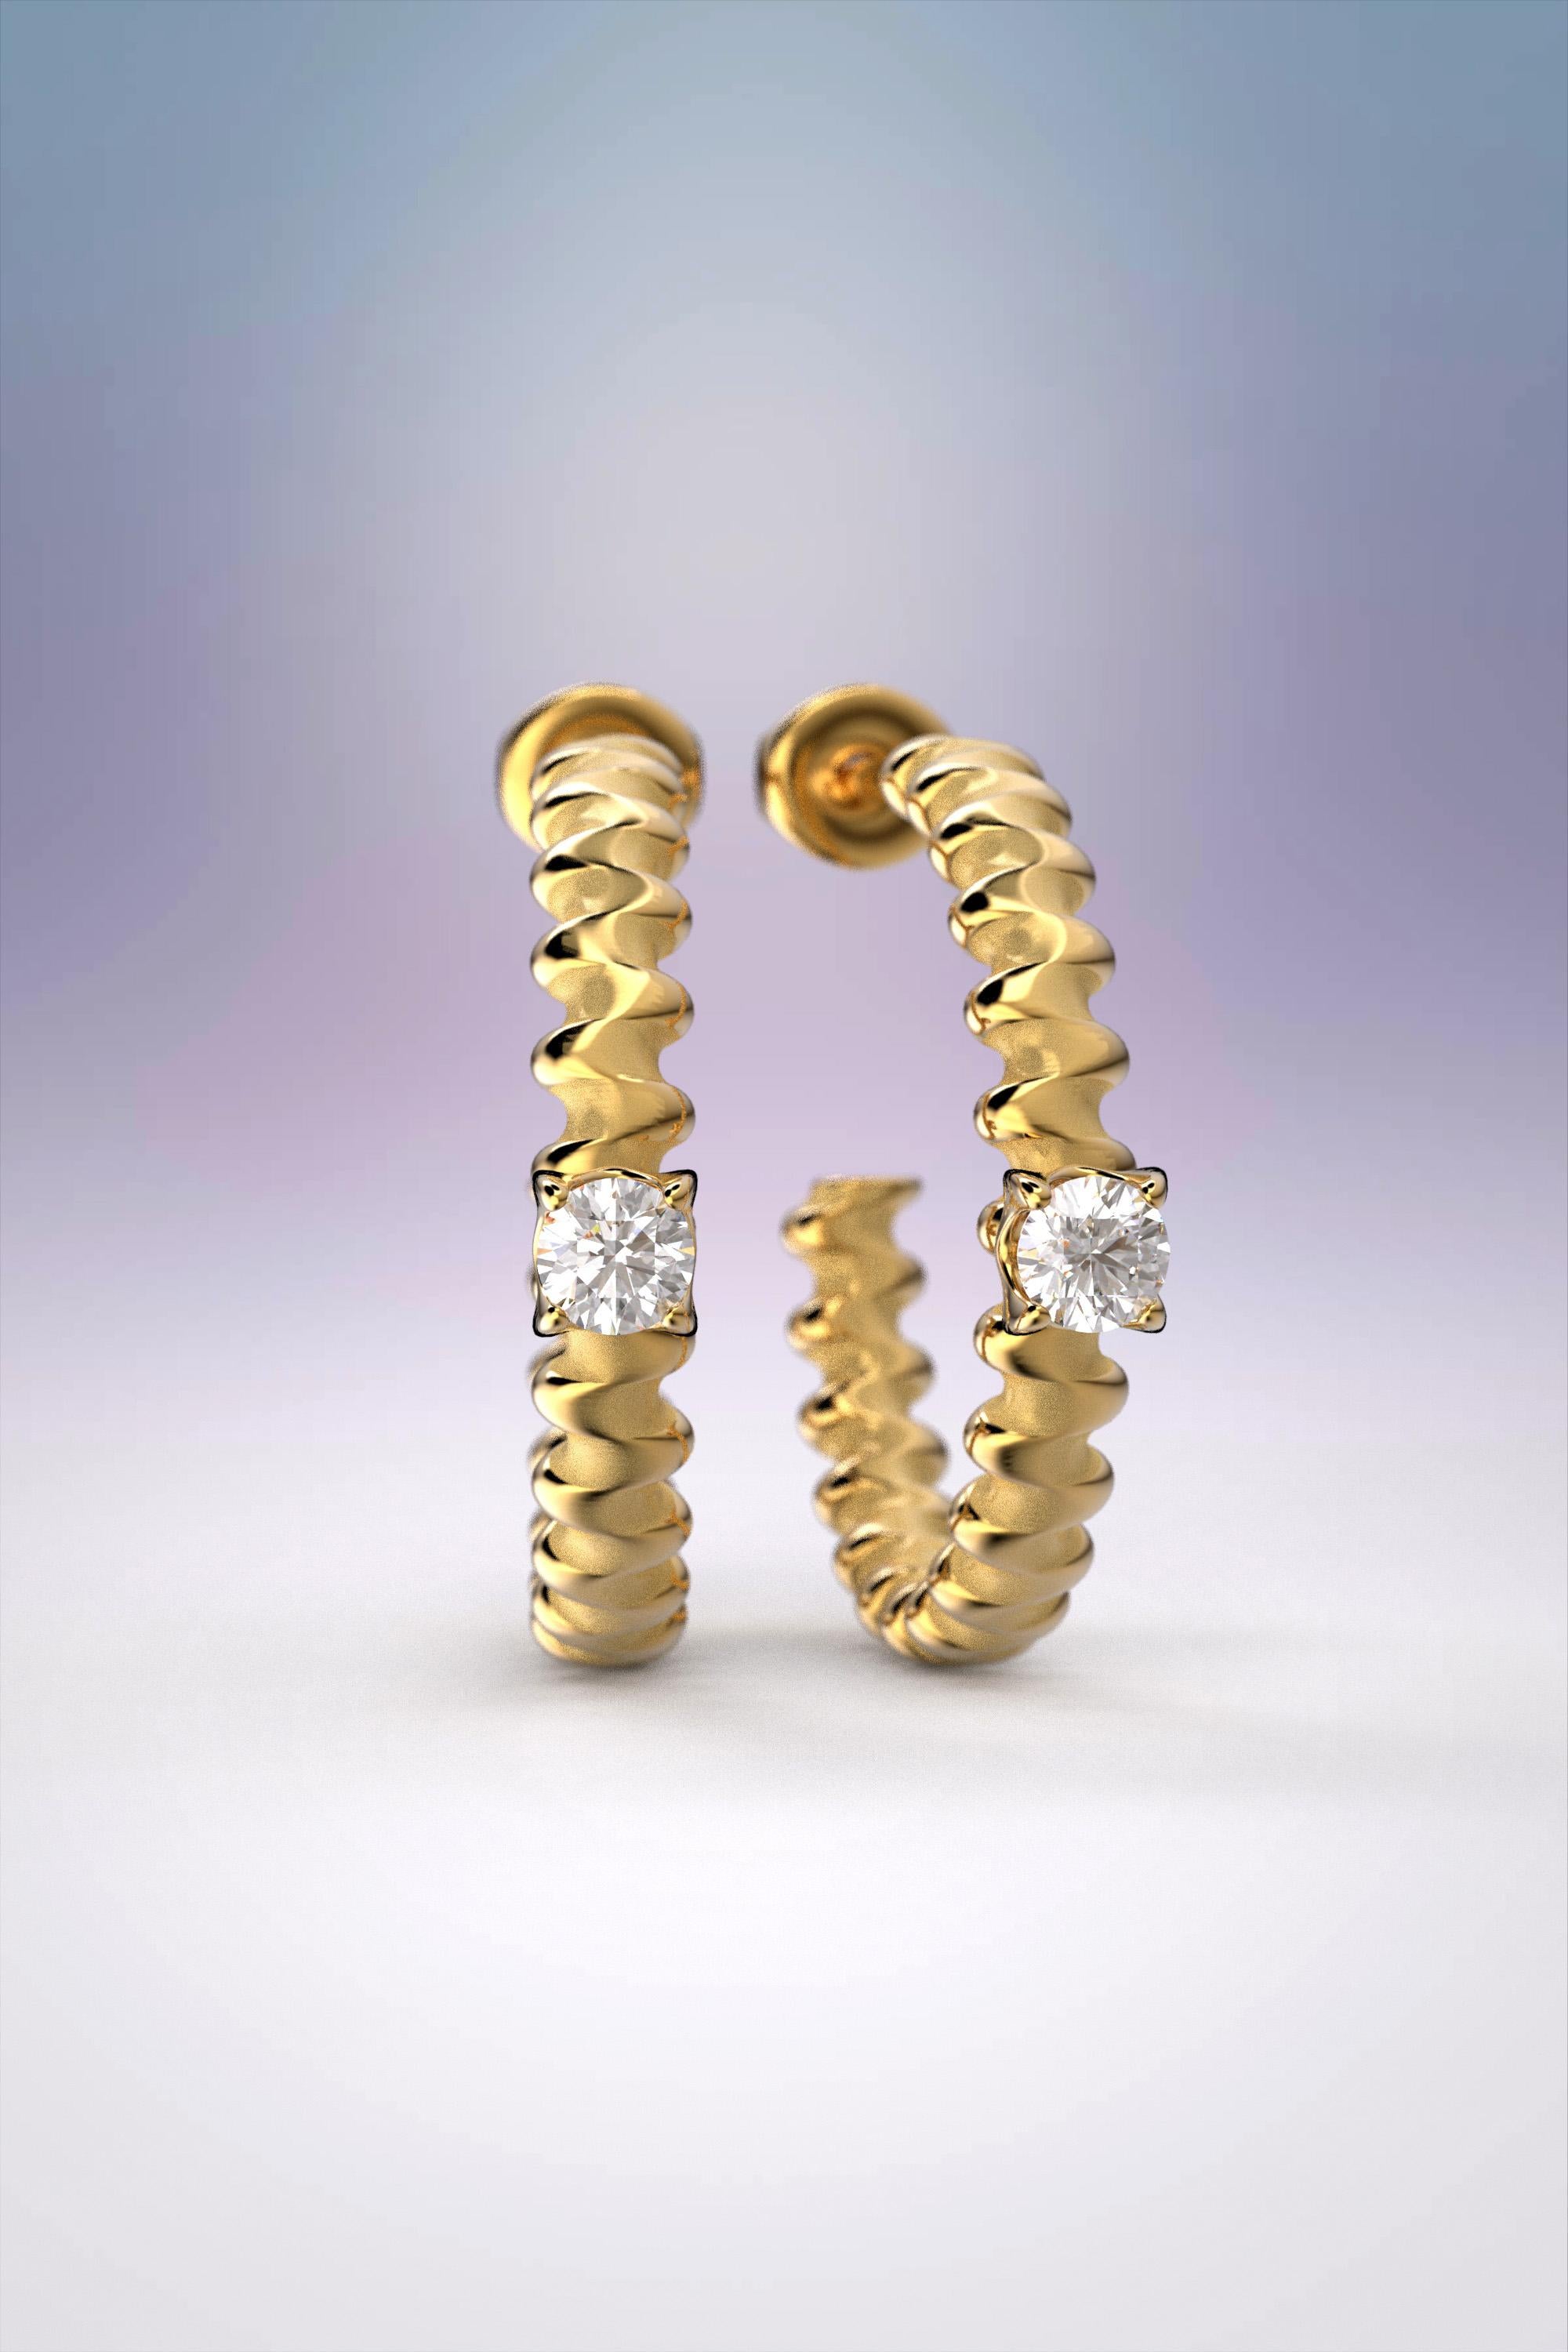 Oltremare Gioielli 14k Diamond Gold Hoop Earrings Designed and Crafted in Italy For Sale 4